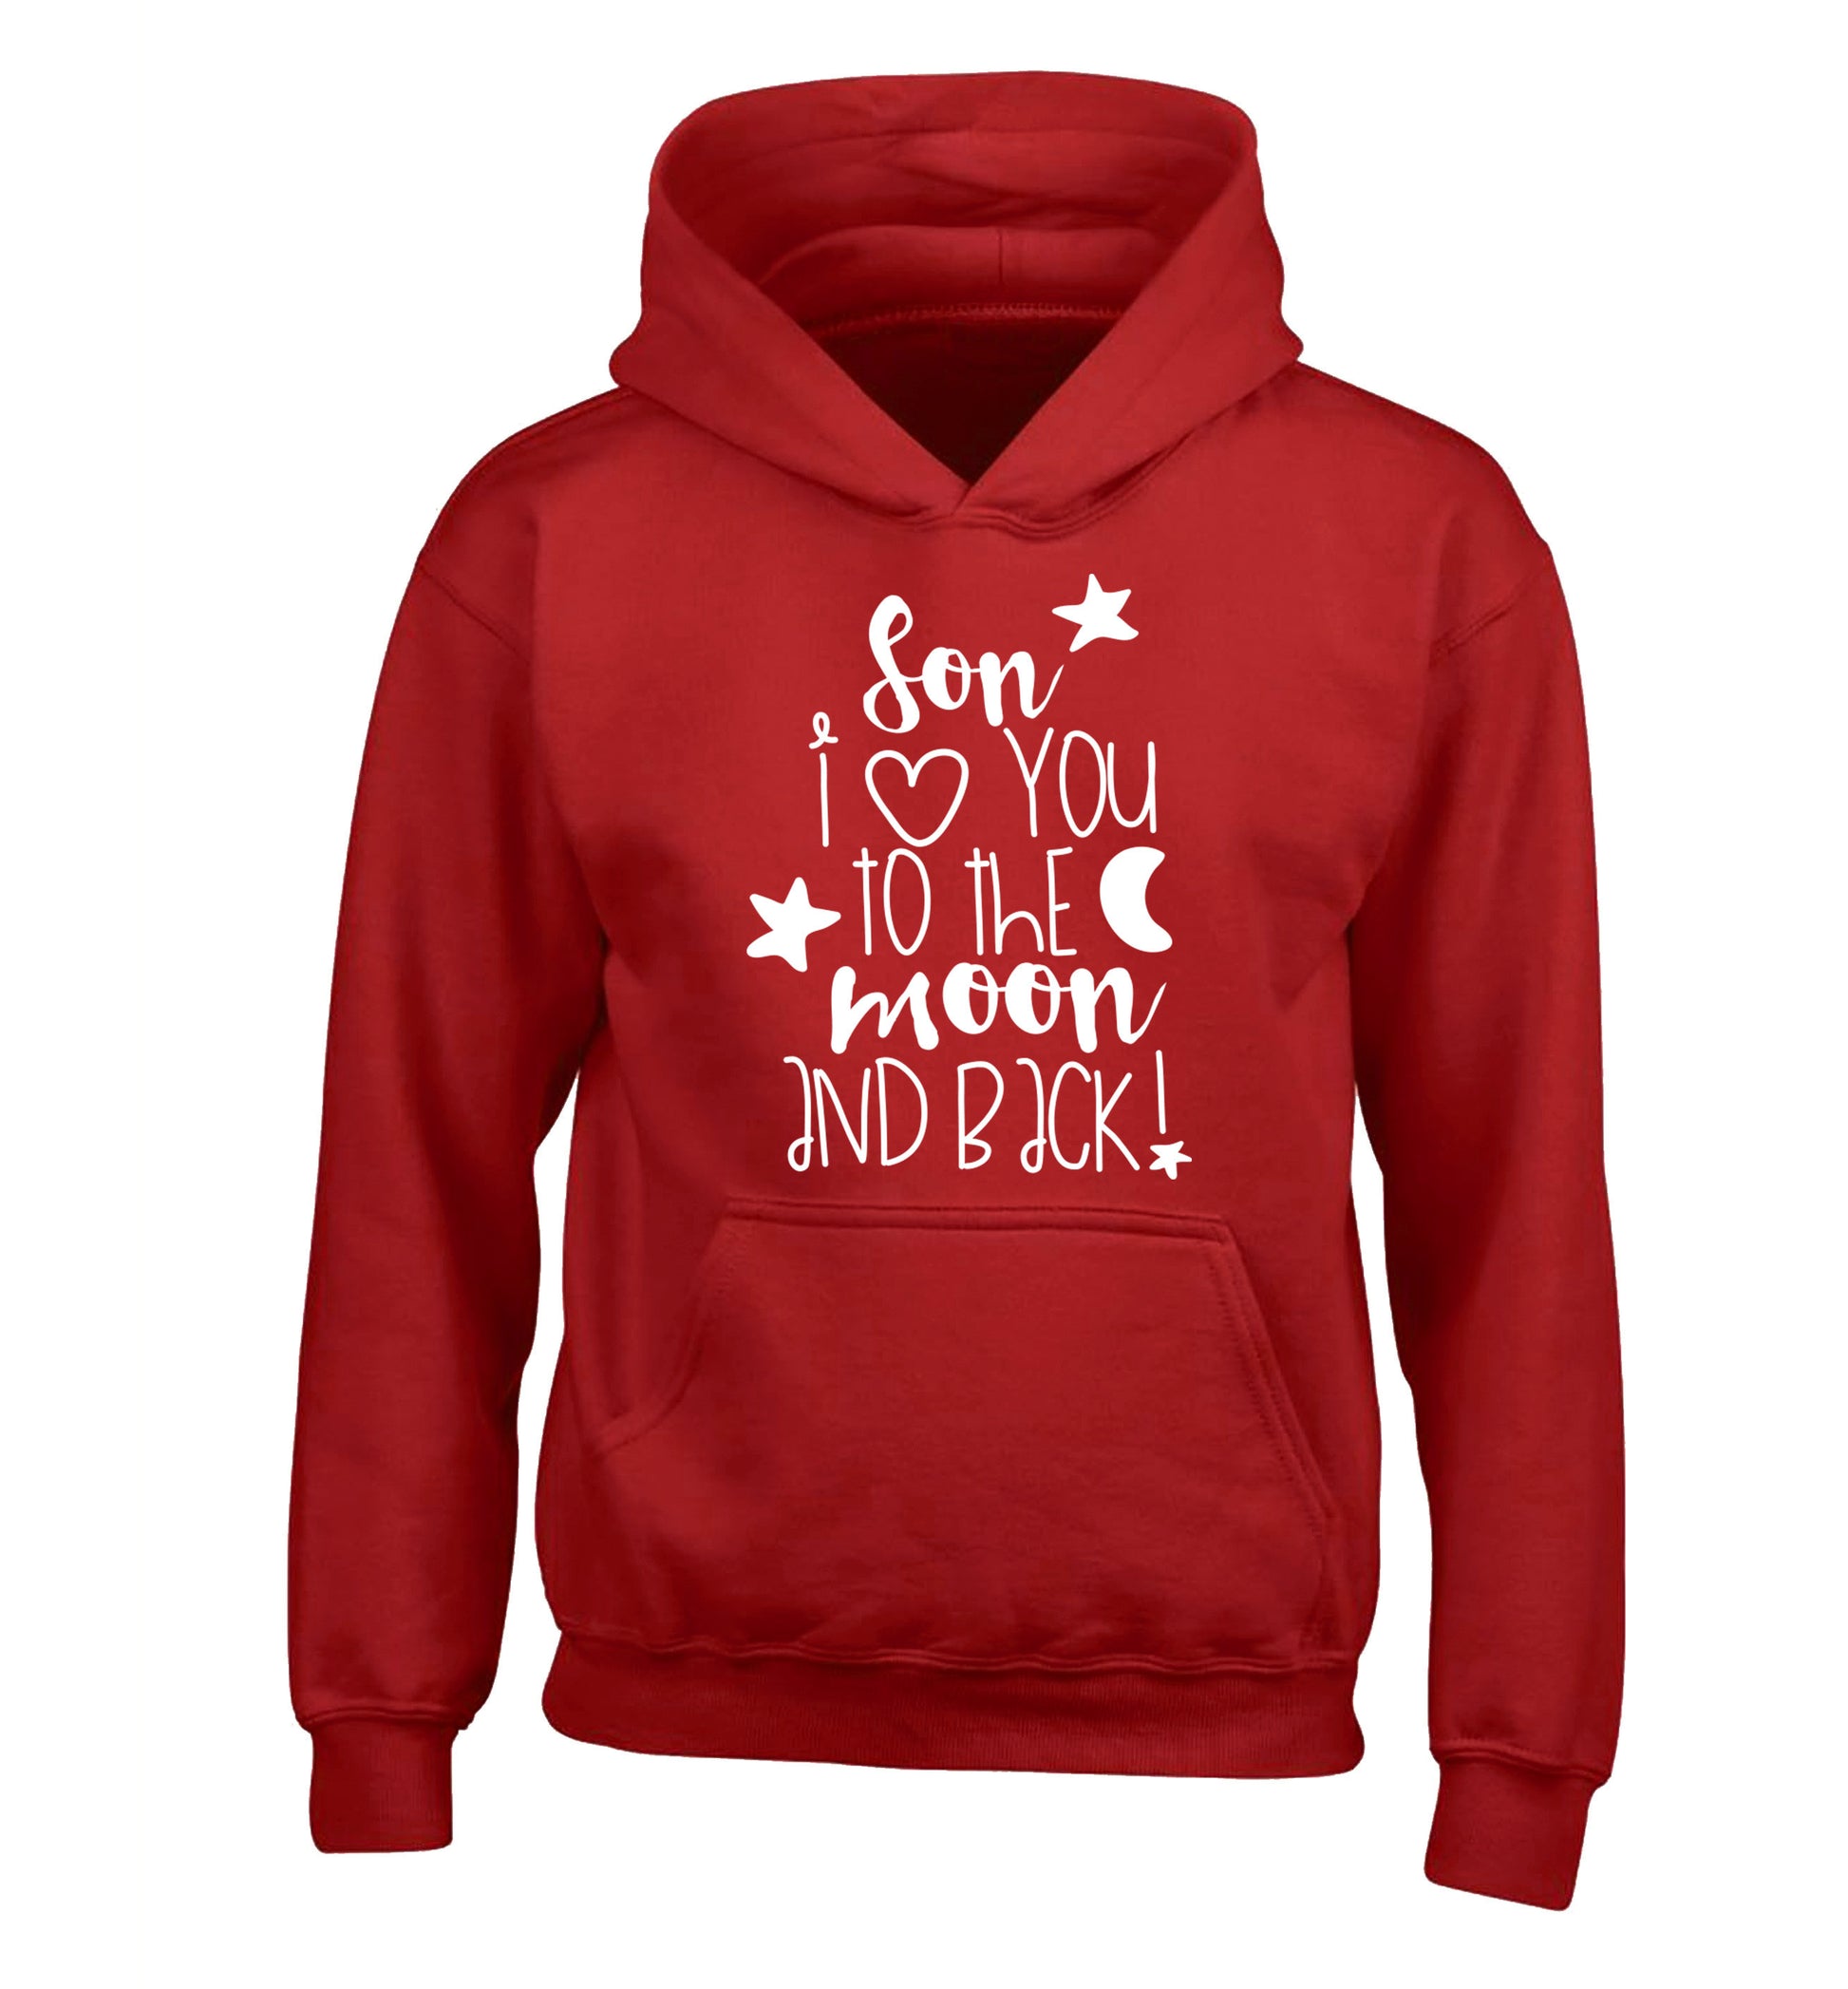 Son I love you to the moon and back children's red hoodie 12-14 Years